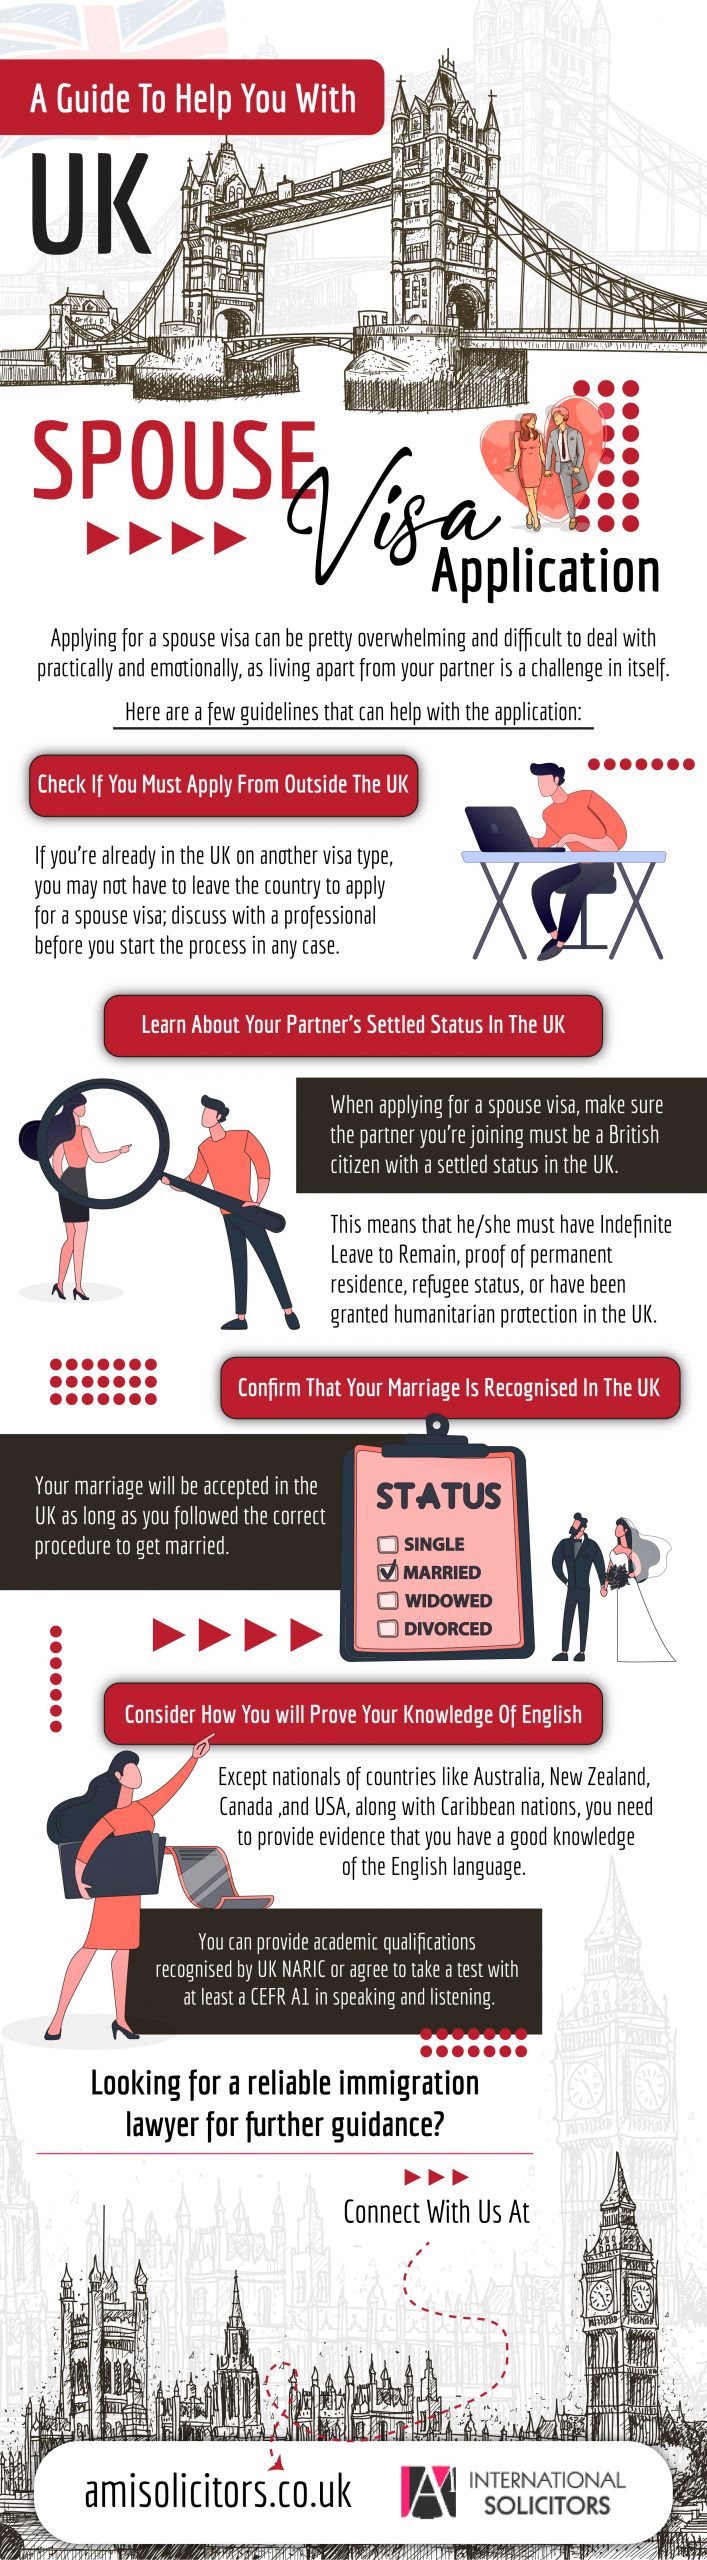 A Guide to Help you with the UK Spouse Visa Application - Infograph